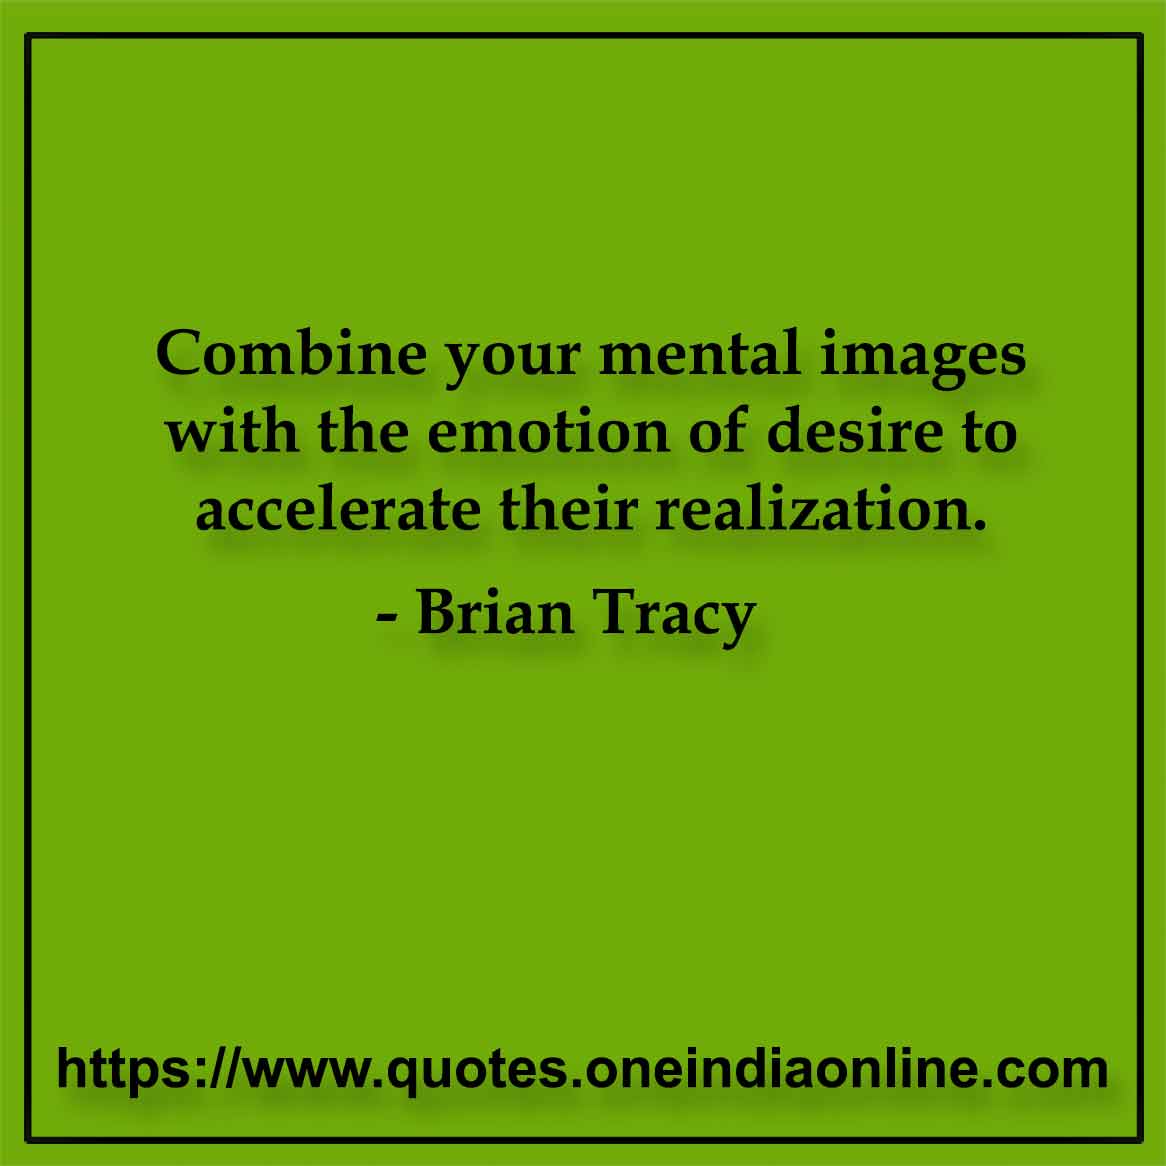 Combine your mental images with the emotion of desire to accelerate their realization. Brian Tracy